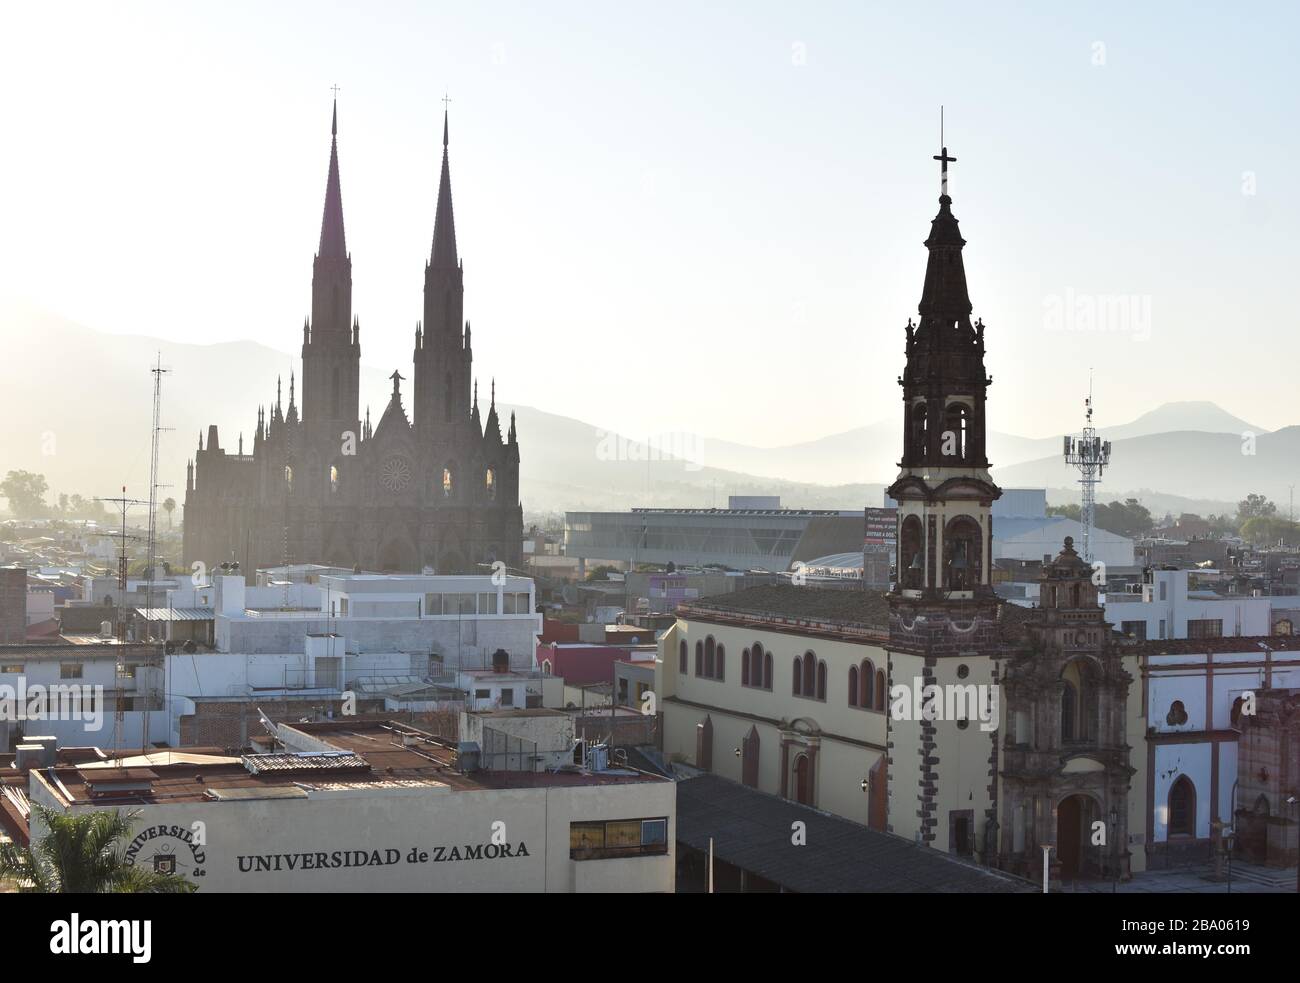 An early morning view of two historic churches of Zamora, Mexico: the cathedral on the left, and the church of San Francisco nearer on the right. Stock Photo